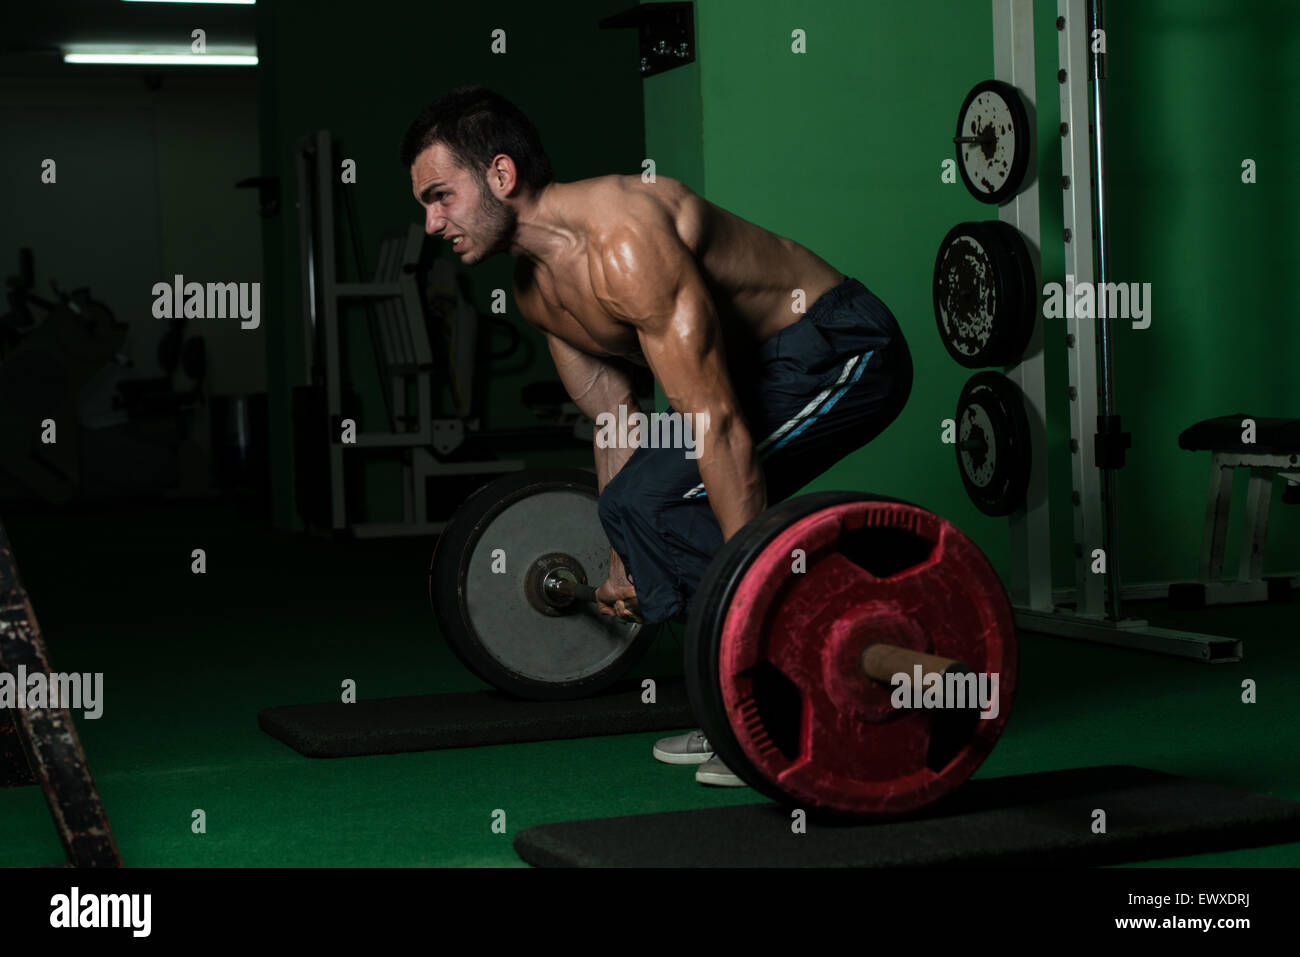 Muscular Man Lifting Dead Lift In The Gym Stock Photo